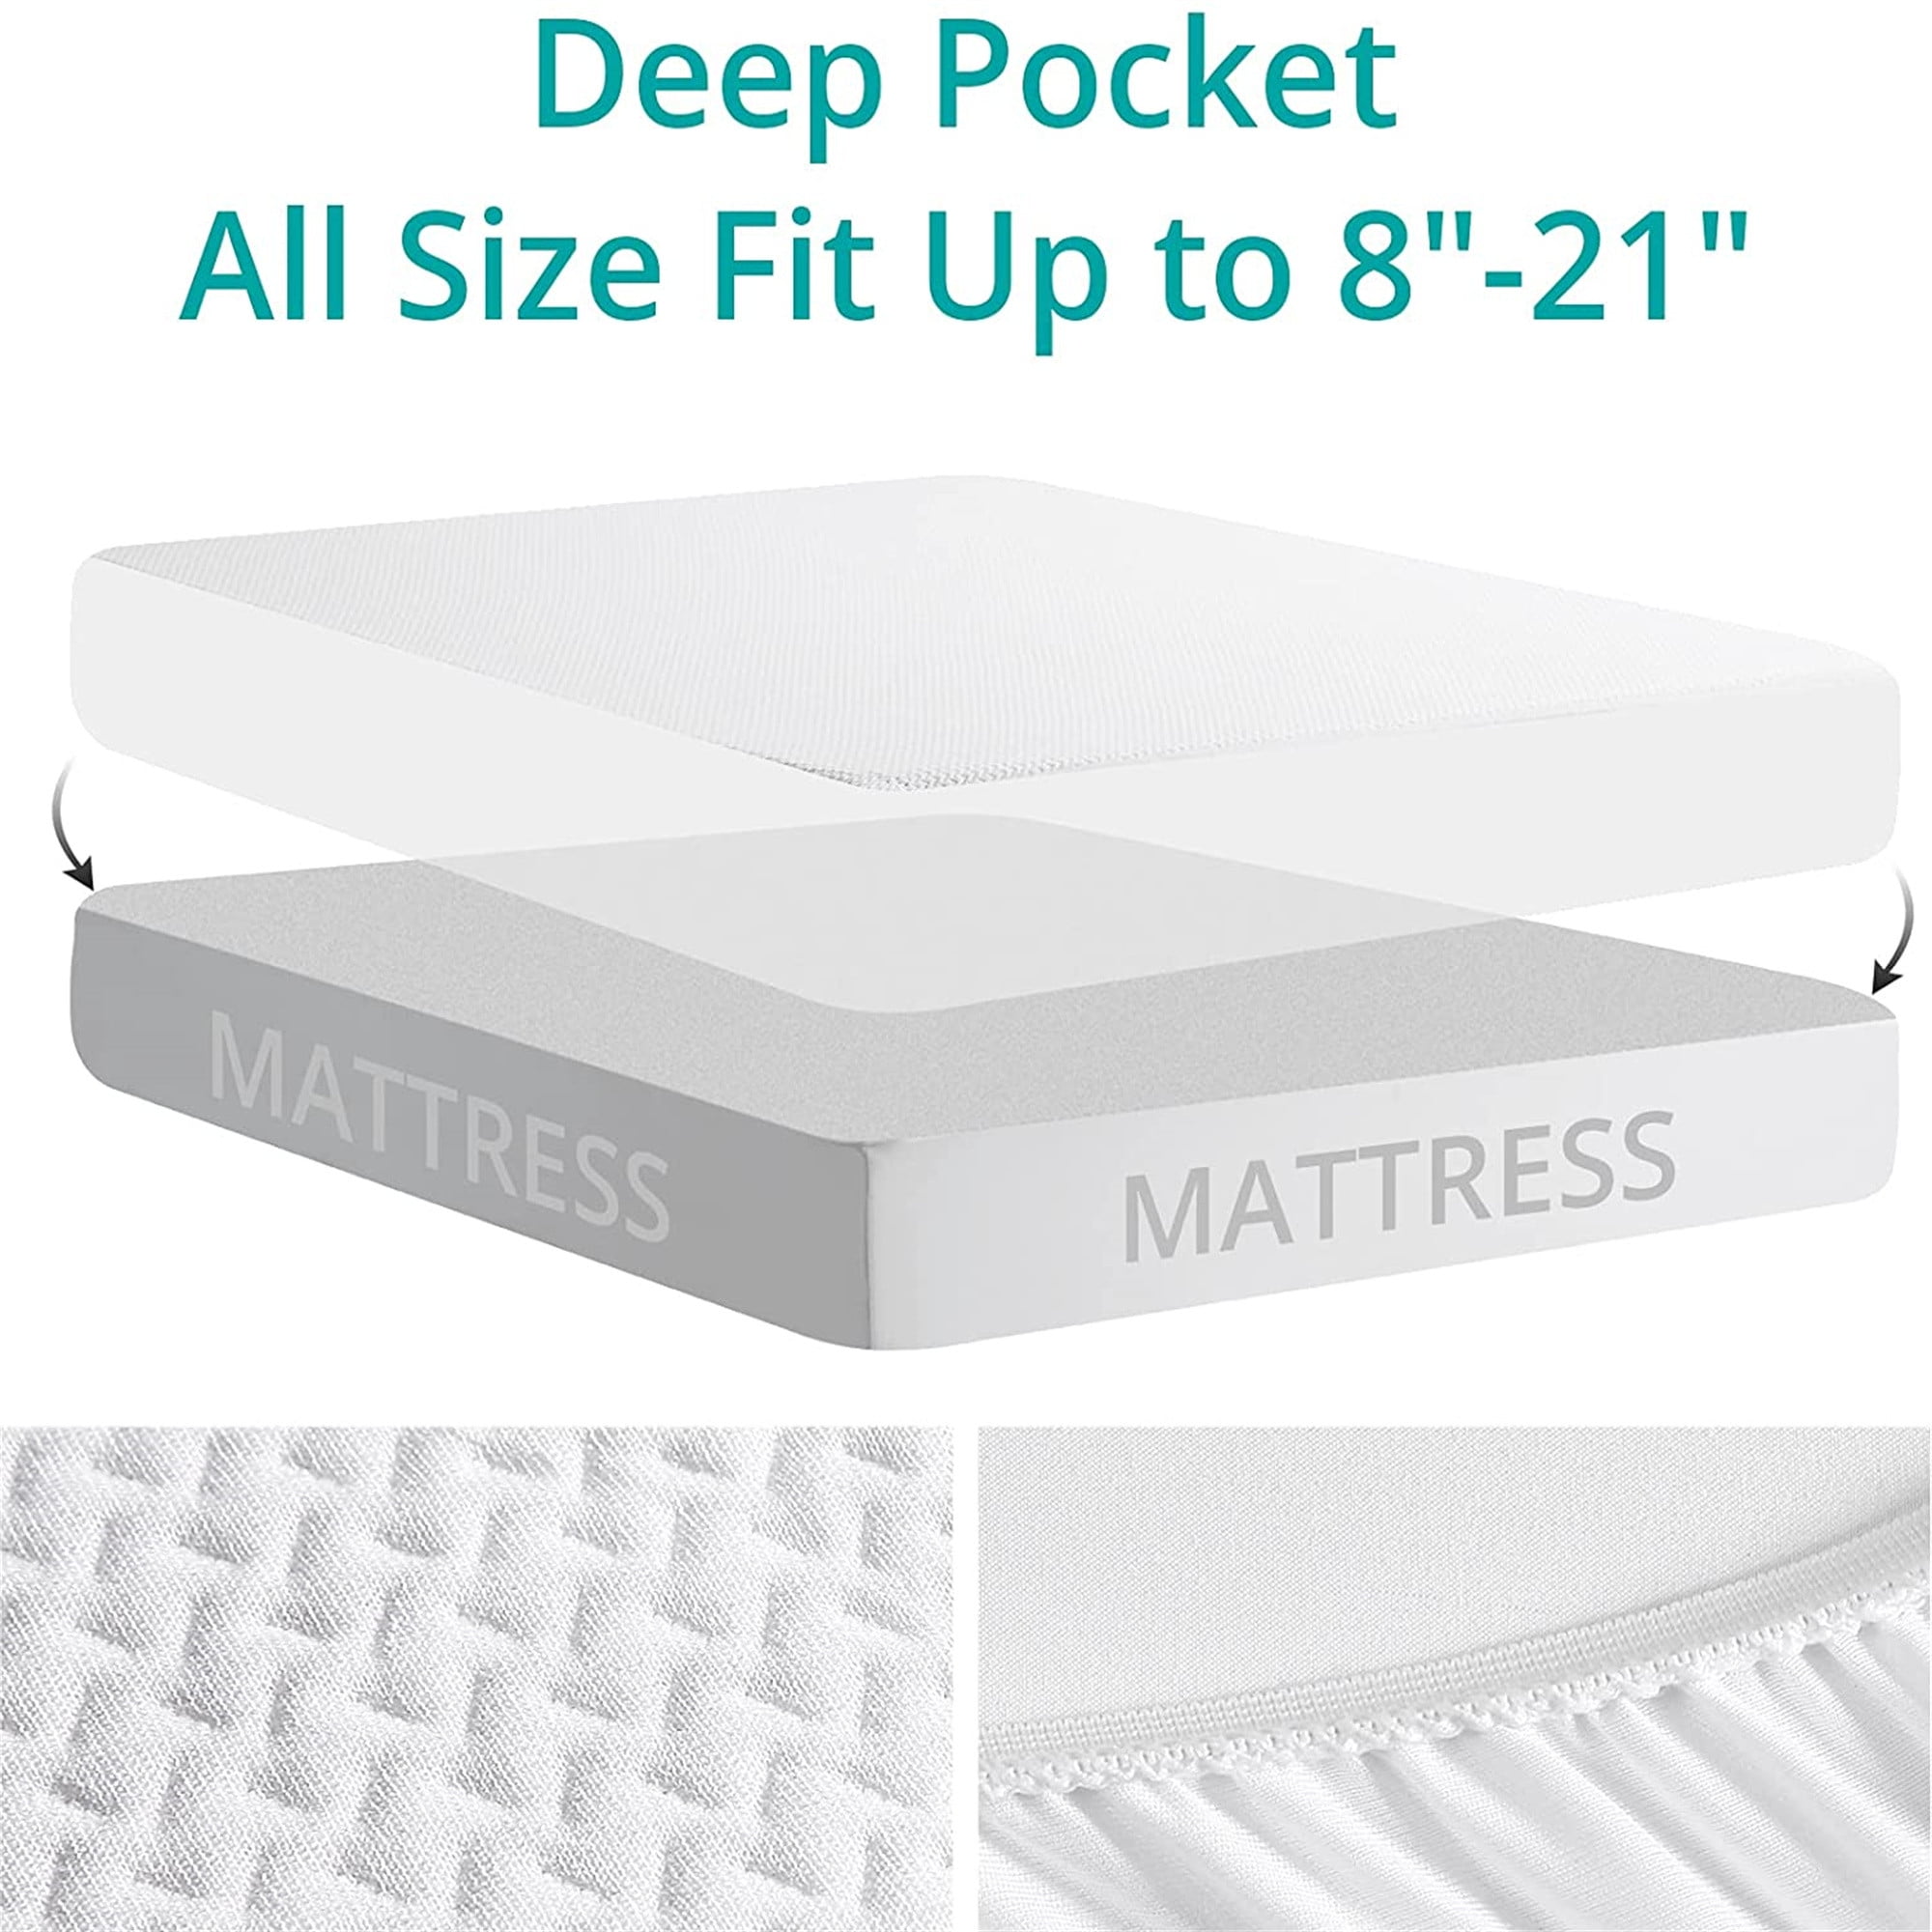 Lunsing King Mattress Protector, Waterproof Breathable Noiseless King Size Mattress Pad with Deep Pocket for 6-18 Inches Mattress, White